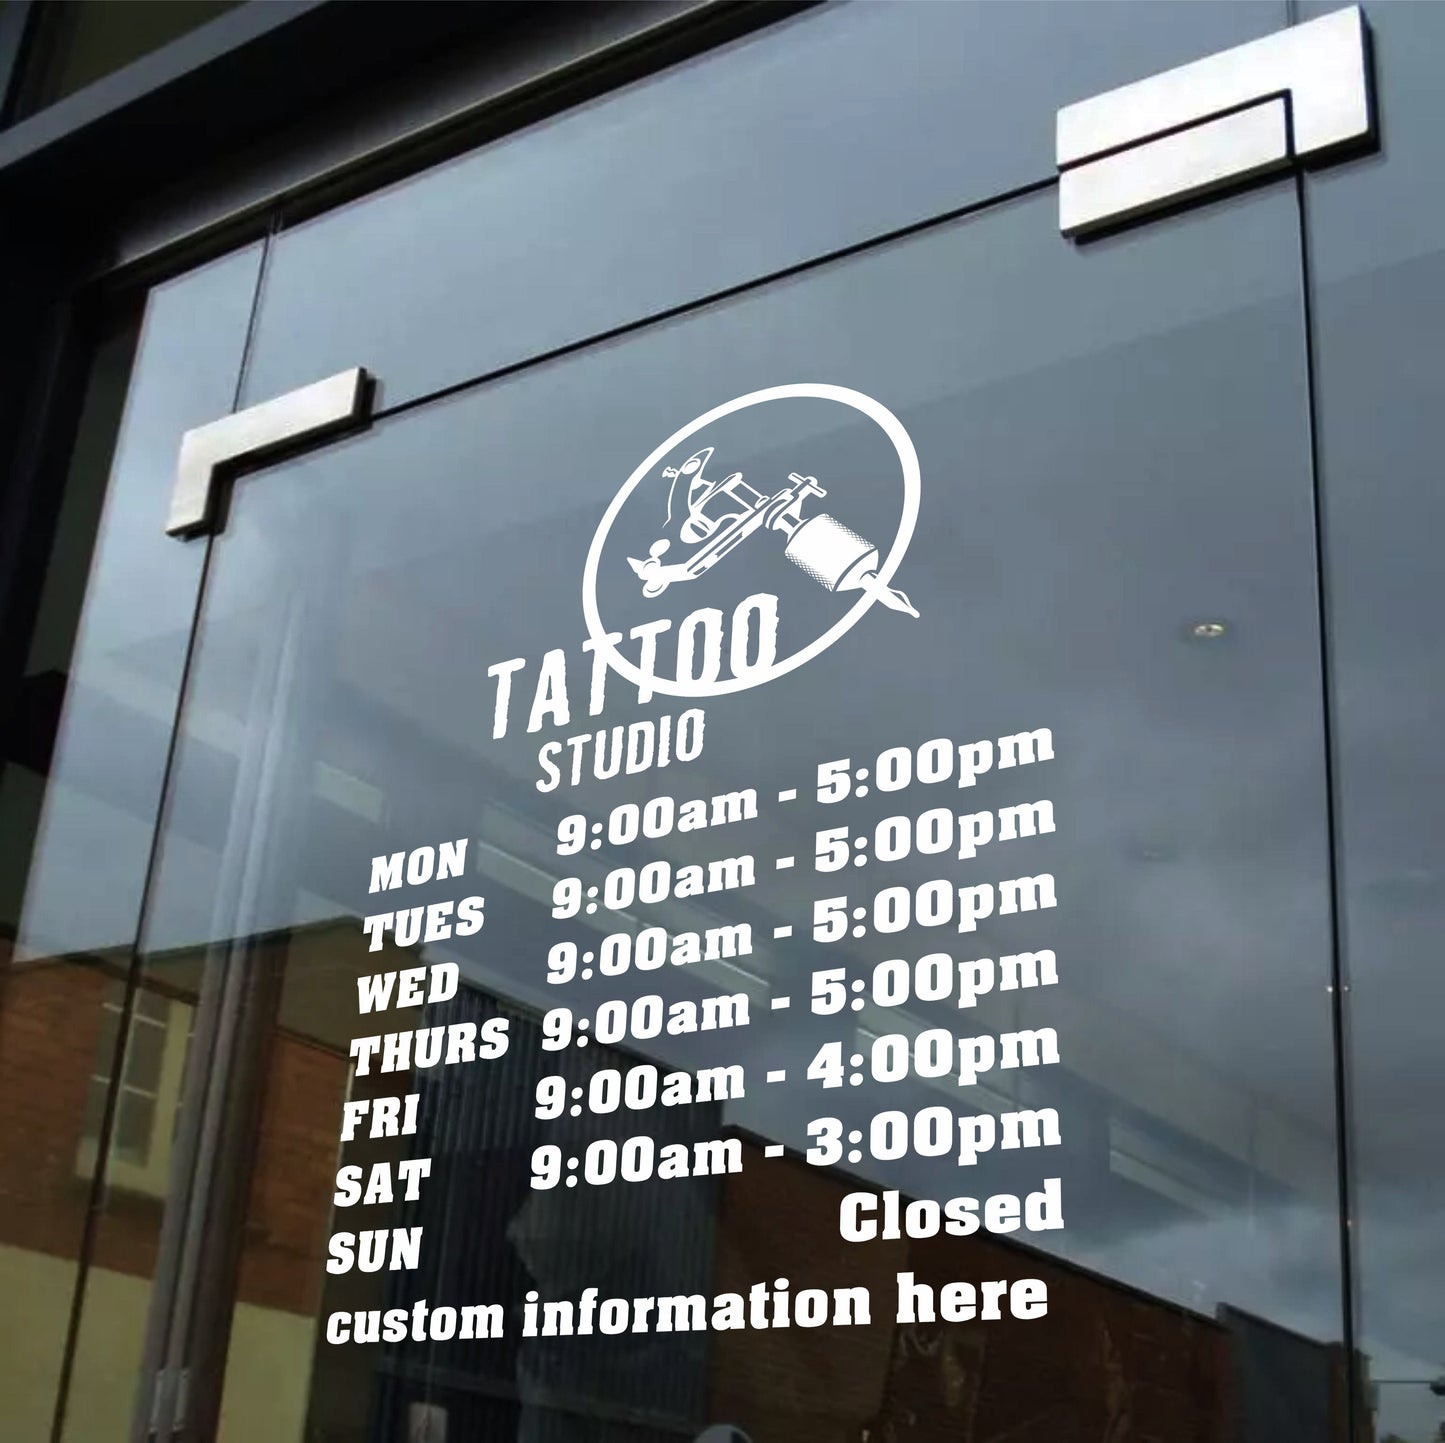 Tattoo Shop/Studio Business Opening Hours - Type 1